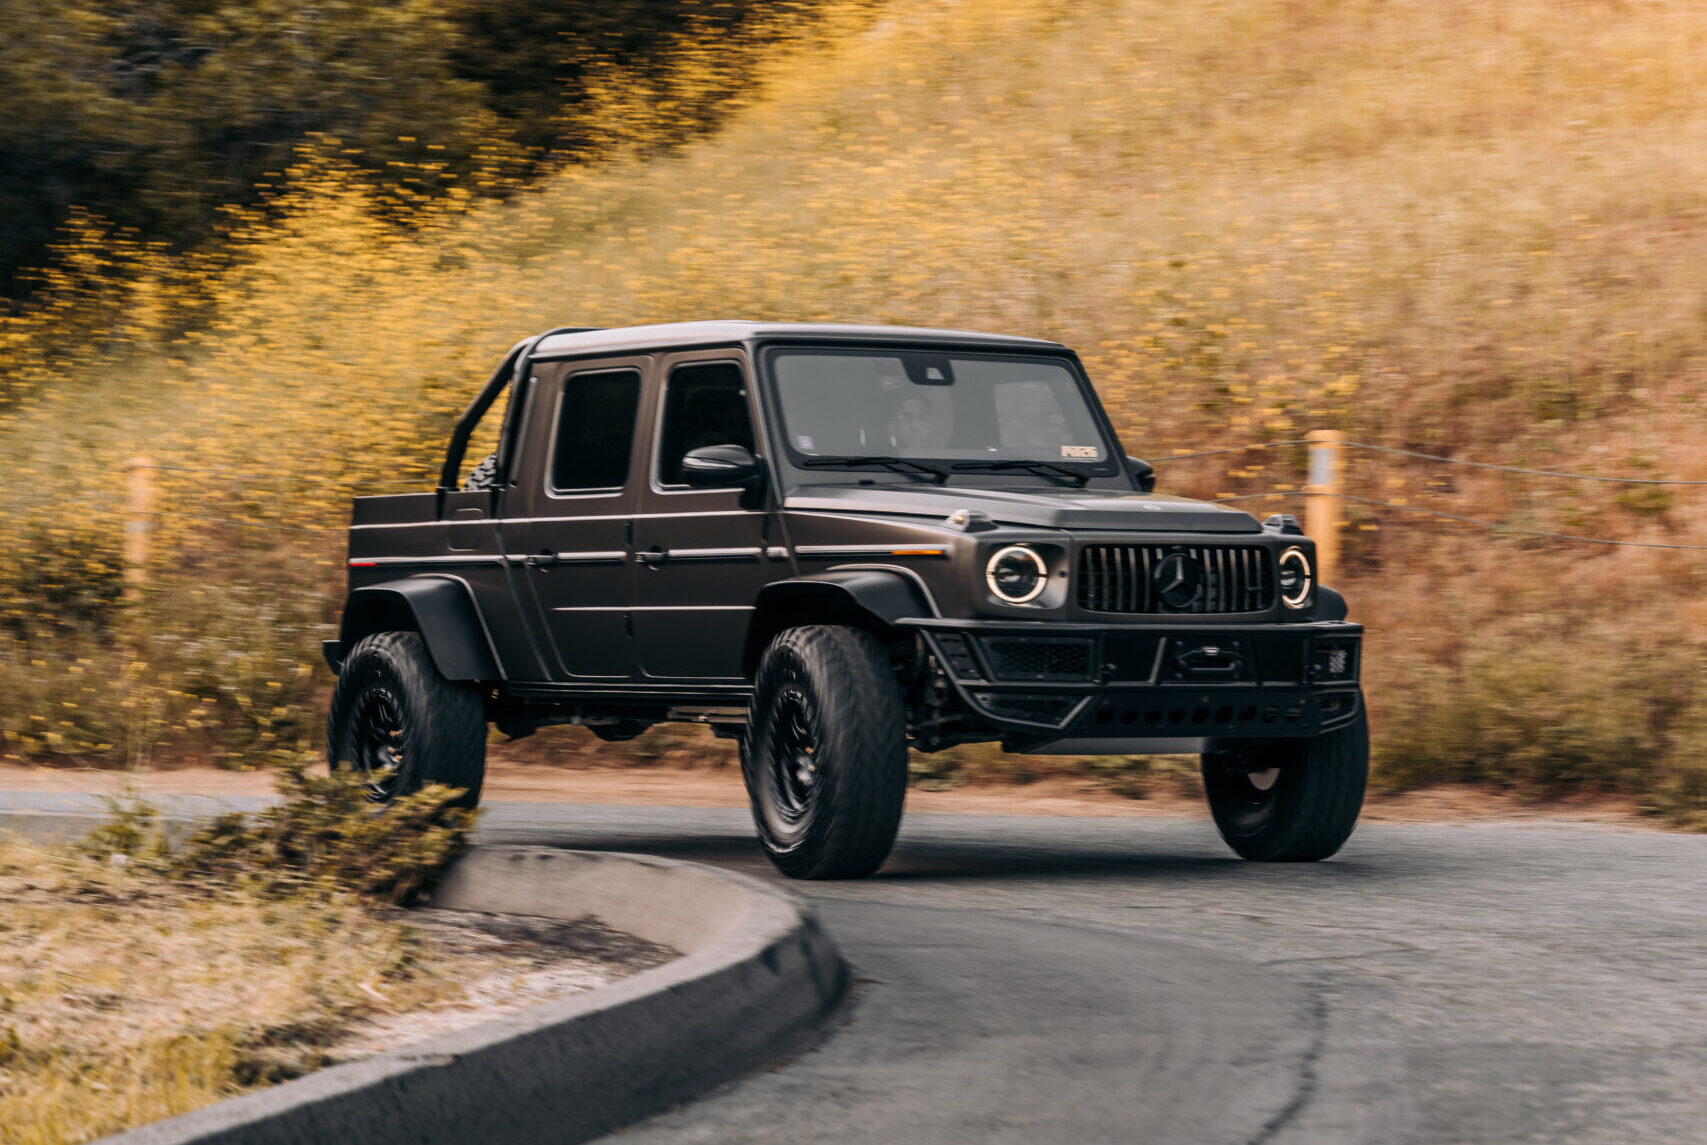 A black Mercedes-Benz G63 AMG by Pit26